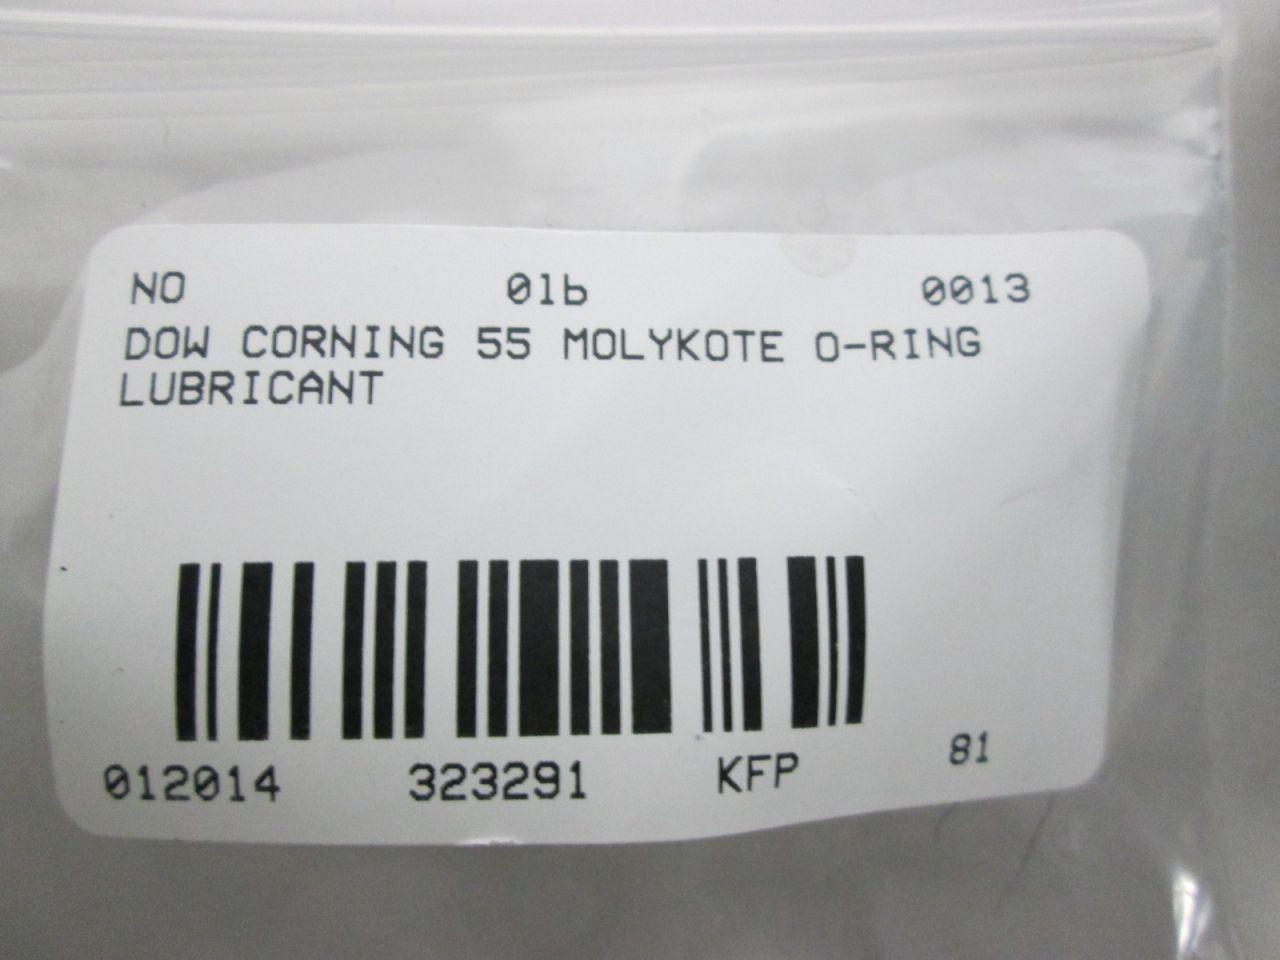 Dow Corning - Molykote ® 111 6 gram O-ring Silicone Lubricant and Sealant -  Be sure to lube your O-rings to help prevent leaks.